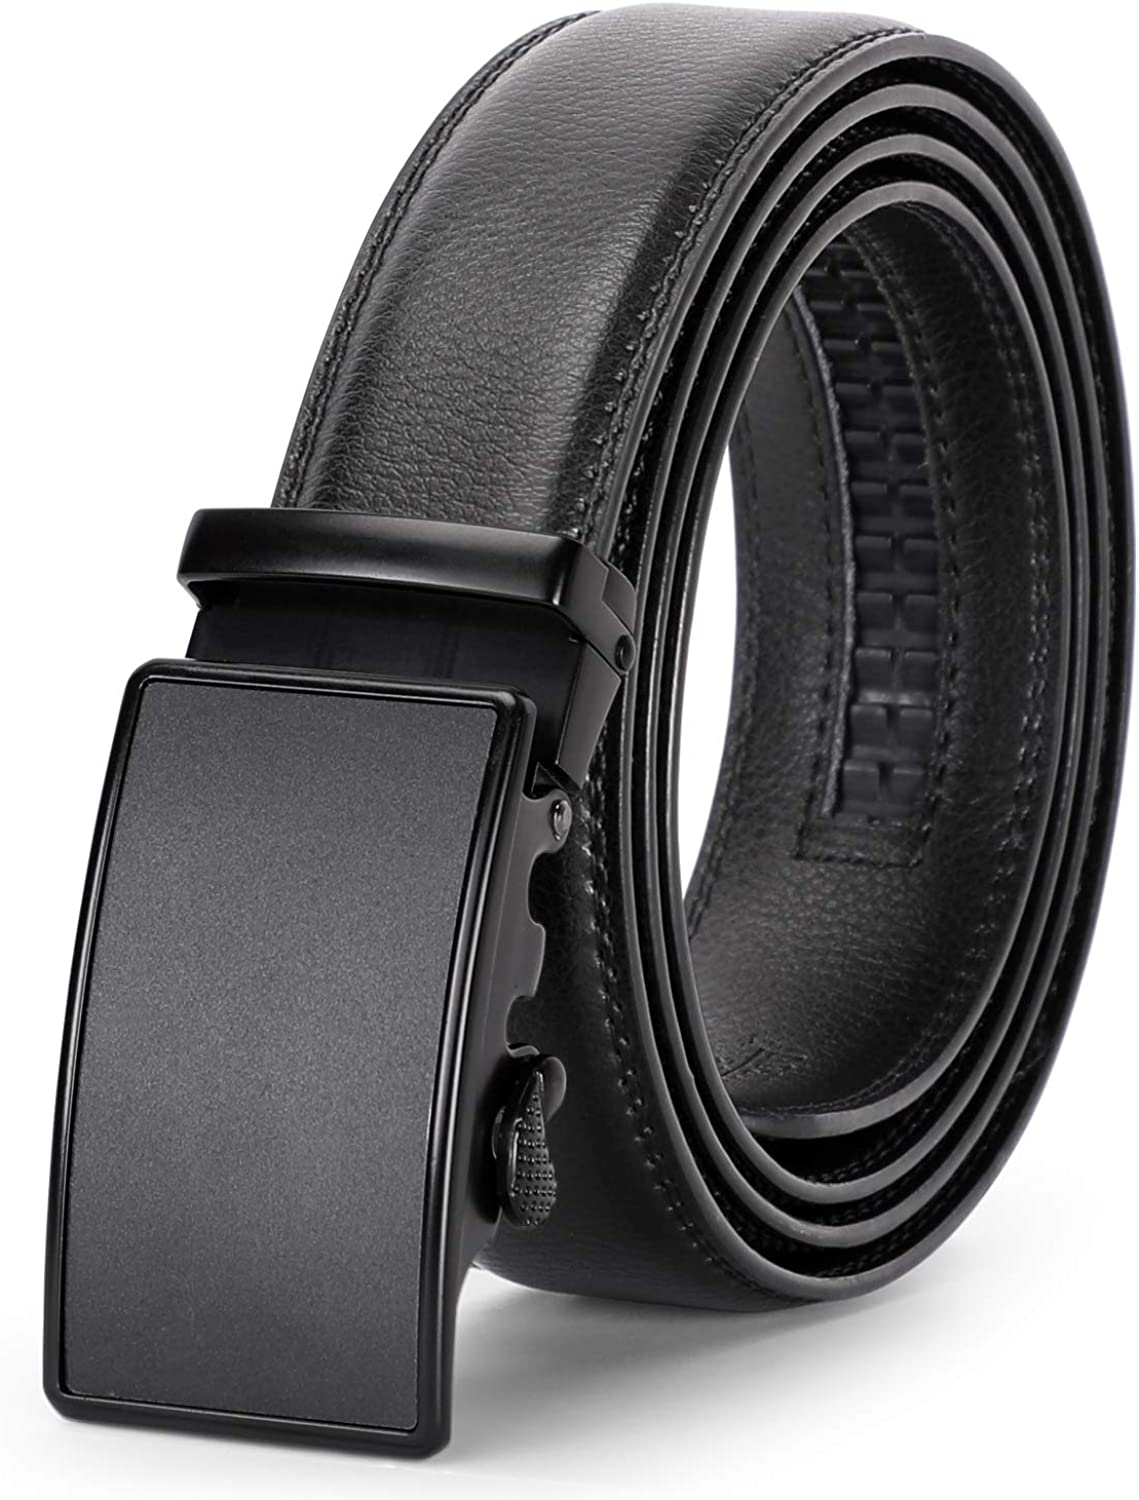 1pc High-grade Men's Black Gun Buckle Deer Design Automatic Leather Belt  For Business & Casual Outfits